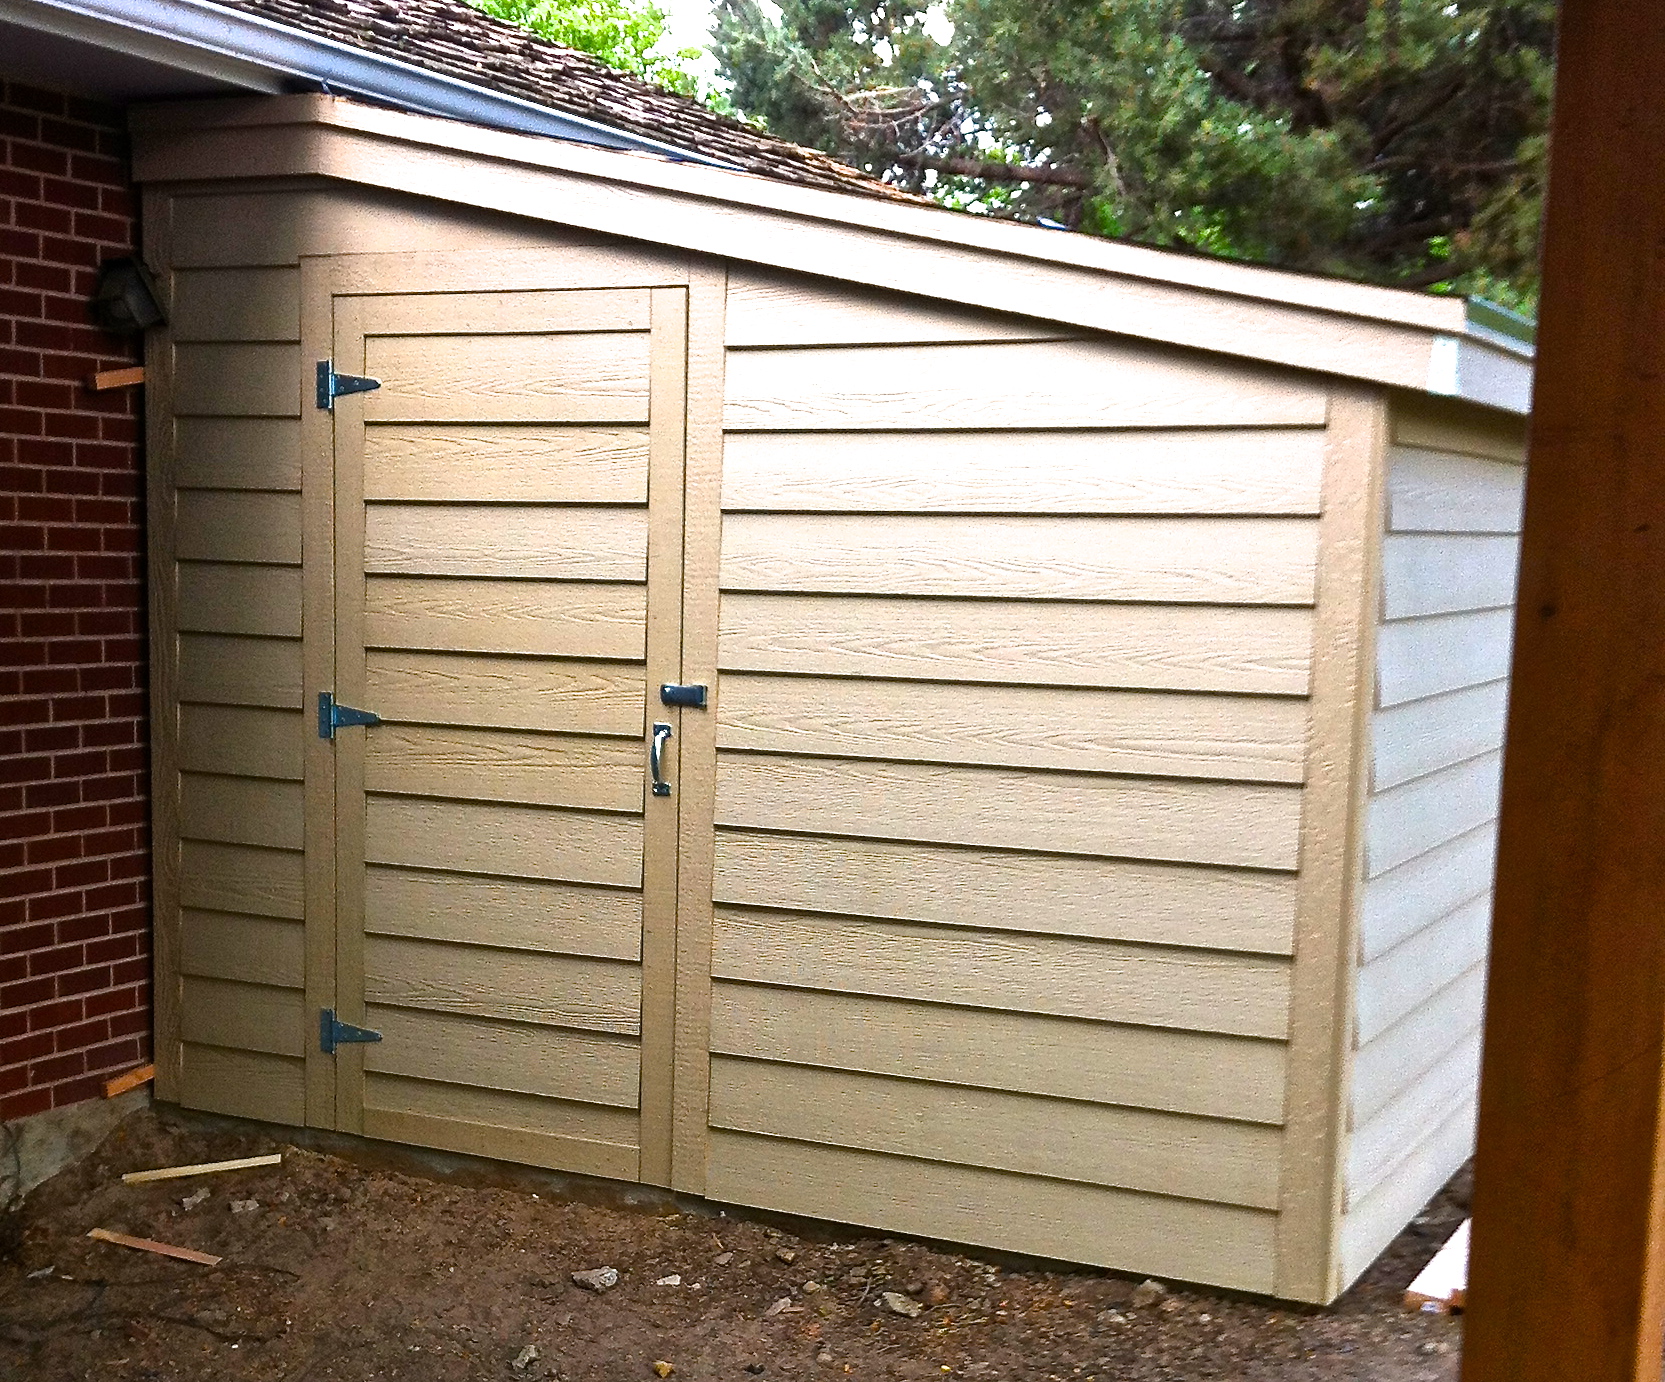 Home » Shed Plans » How To Build A Car Shed